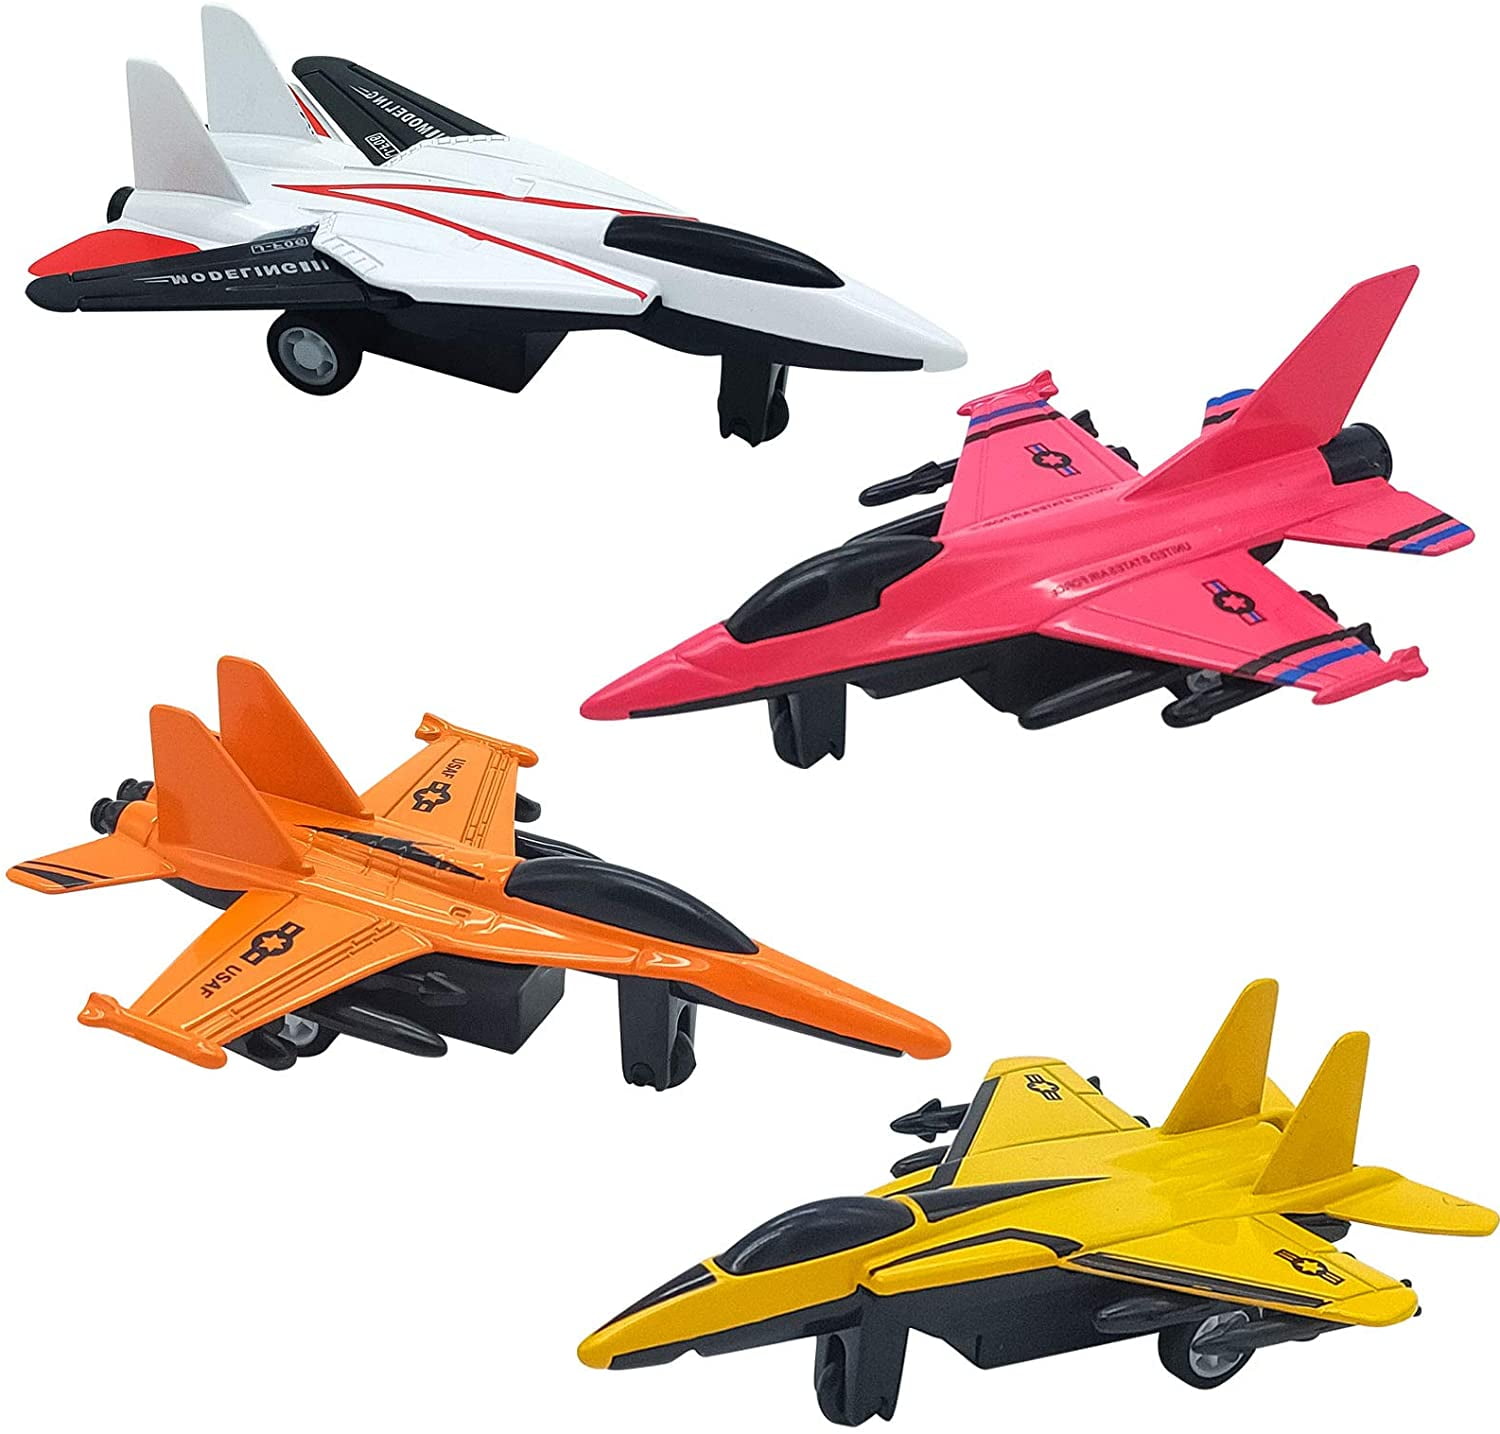 Lot of 4 Airplanes Ages 3+ Air Power Die-cast Metal & Plastic Airplane Toy